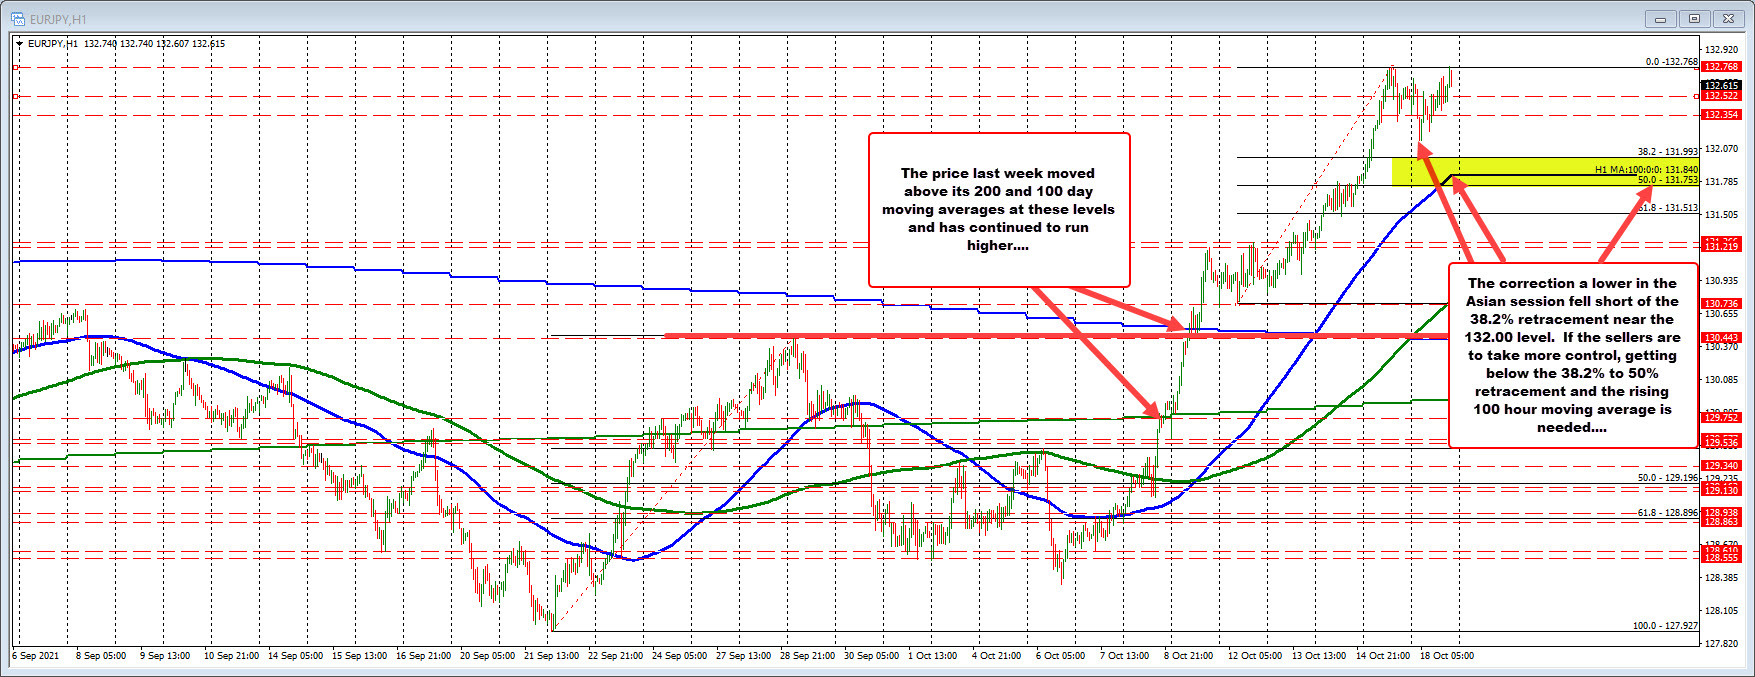 EURJPY on the hourly chart